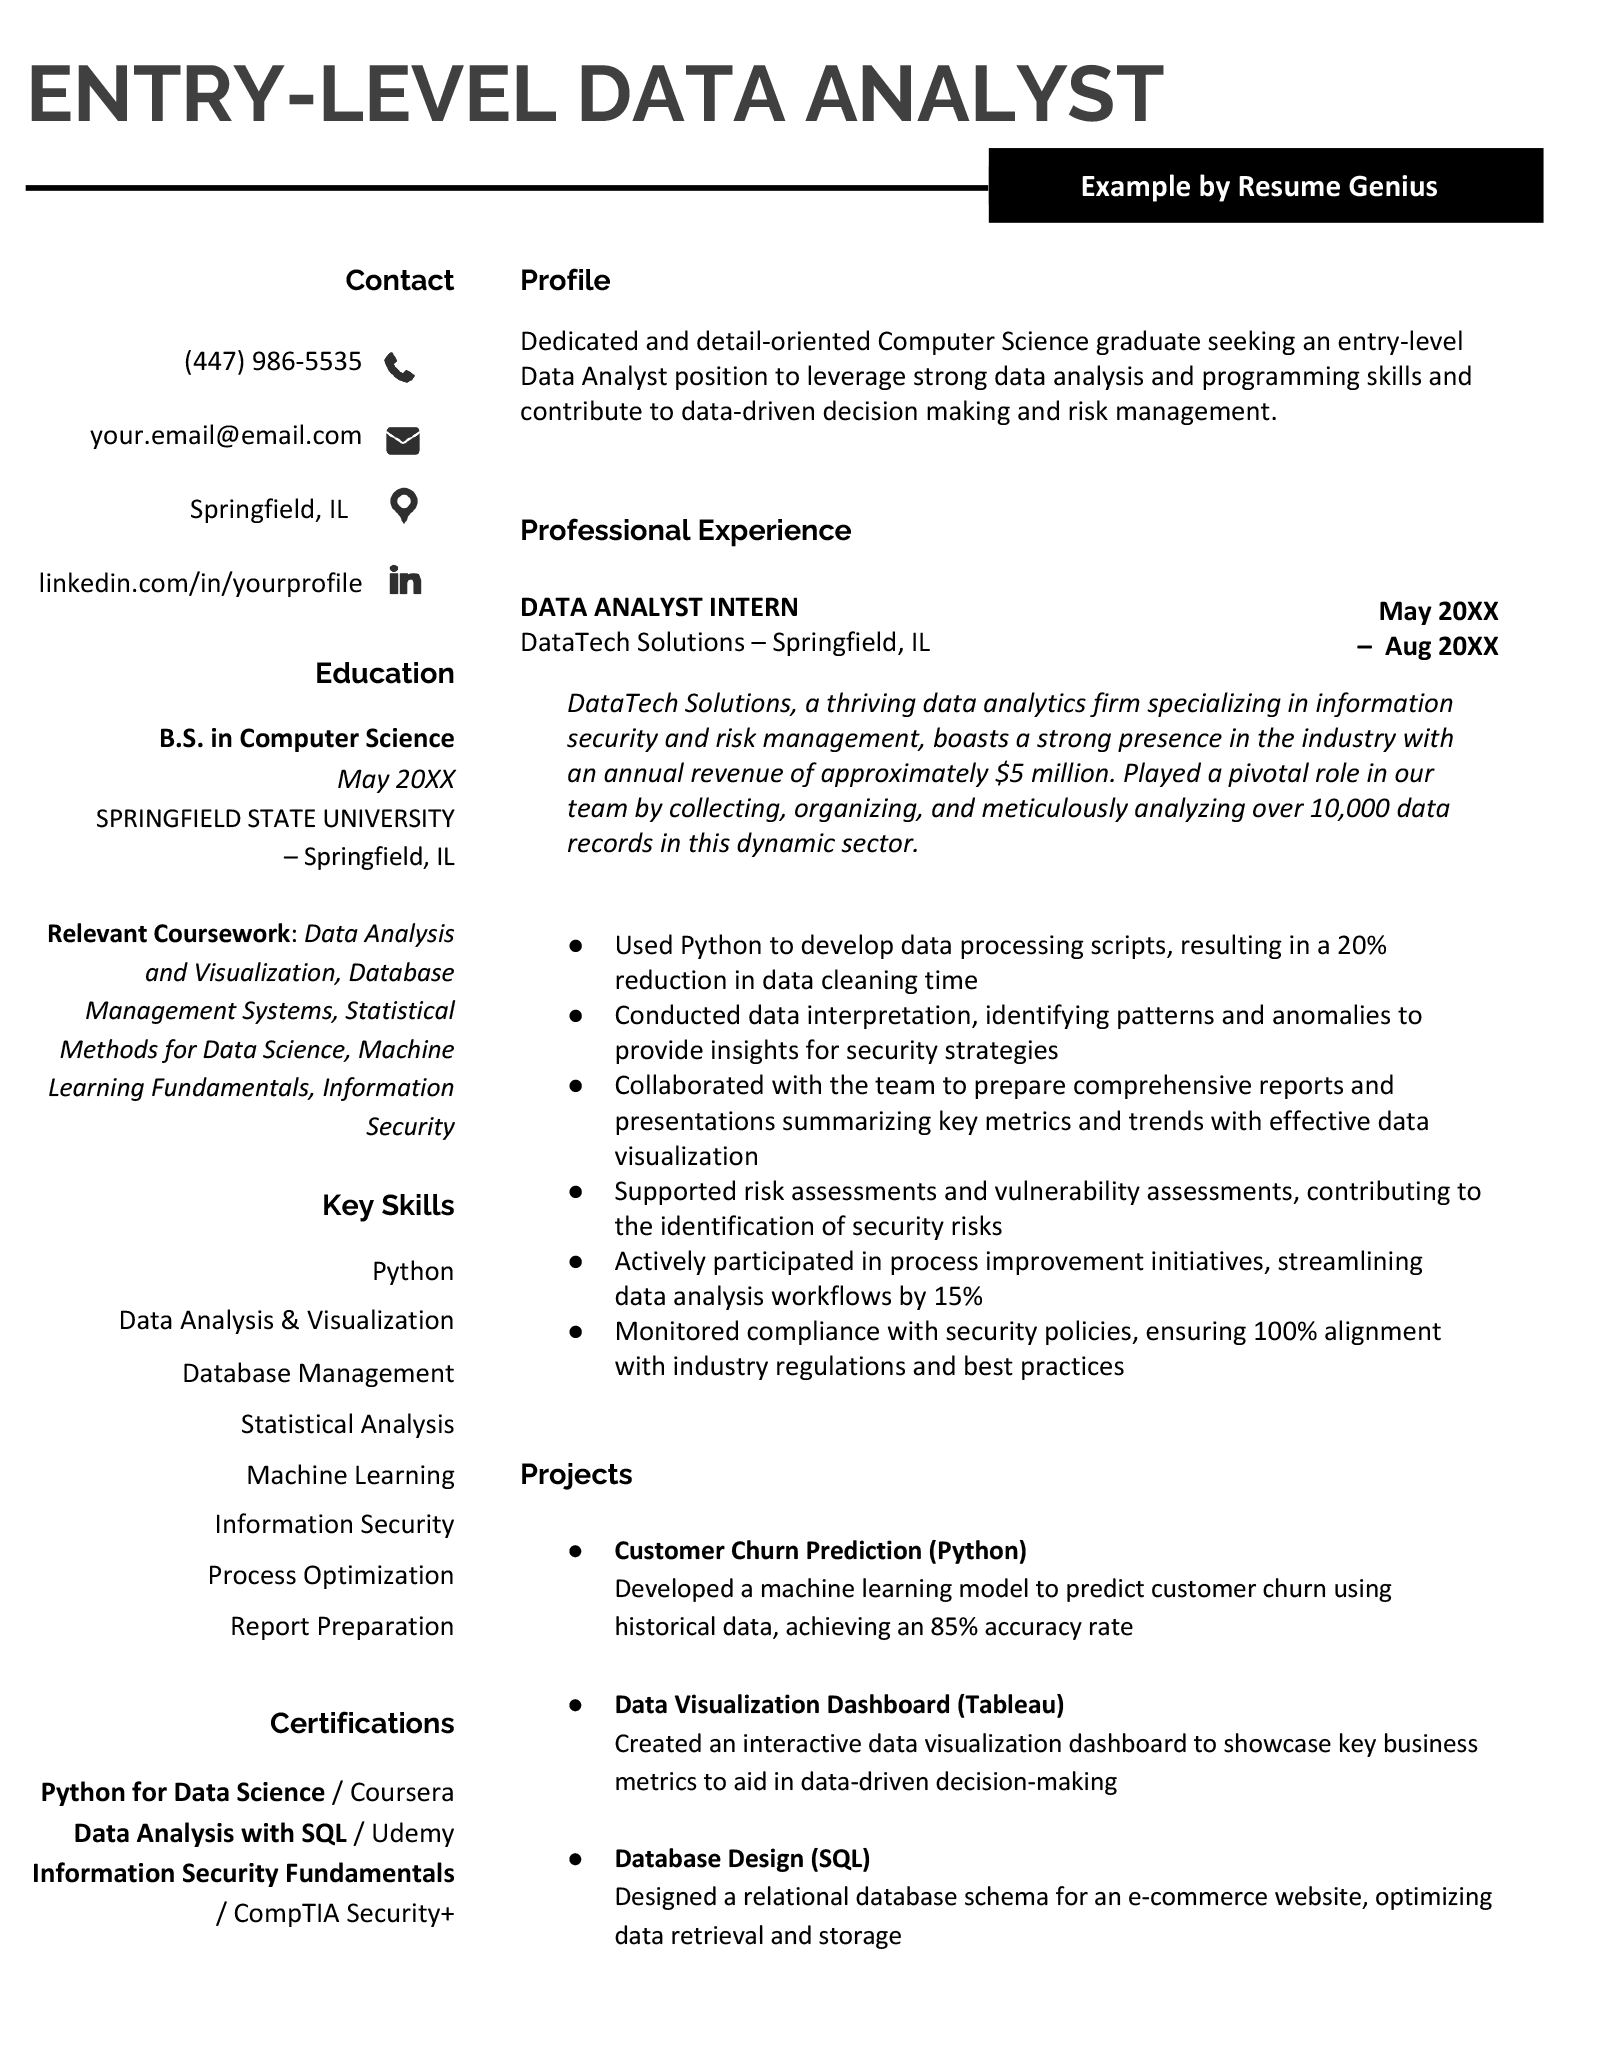 Example of an entry-level data analyst resume using a two-column resume to showcase the candidate's academic achievements, certifications, internship experience, and projects.